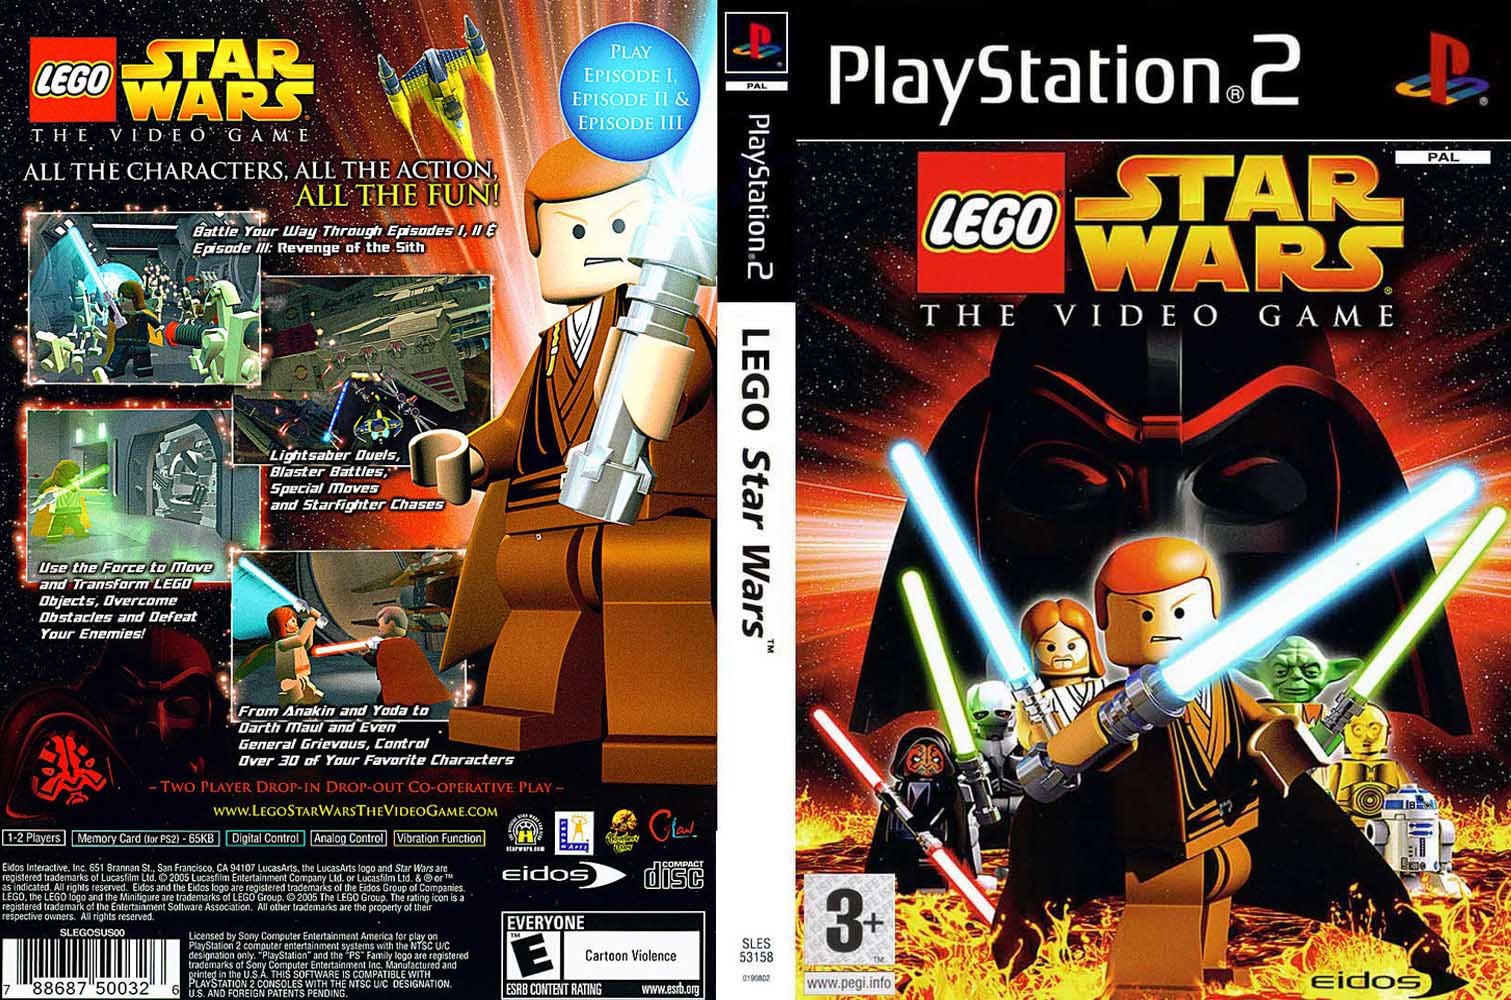 LEGO Star Wars: The Video Game #15